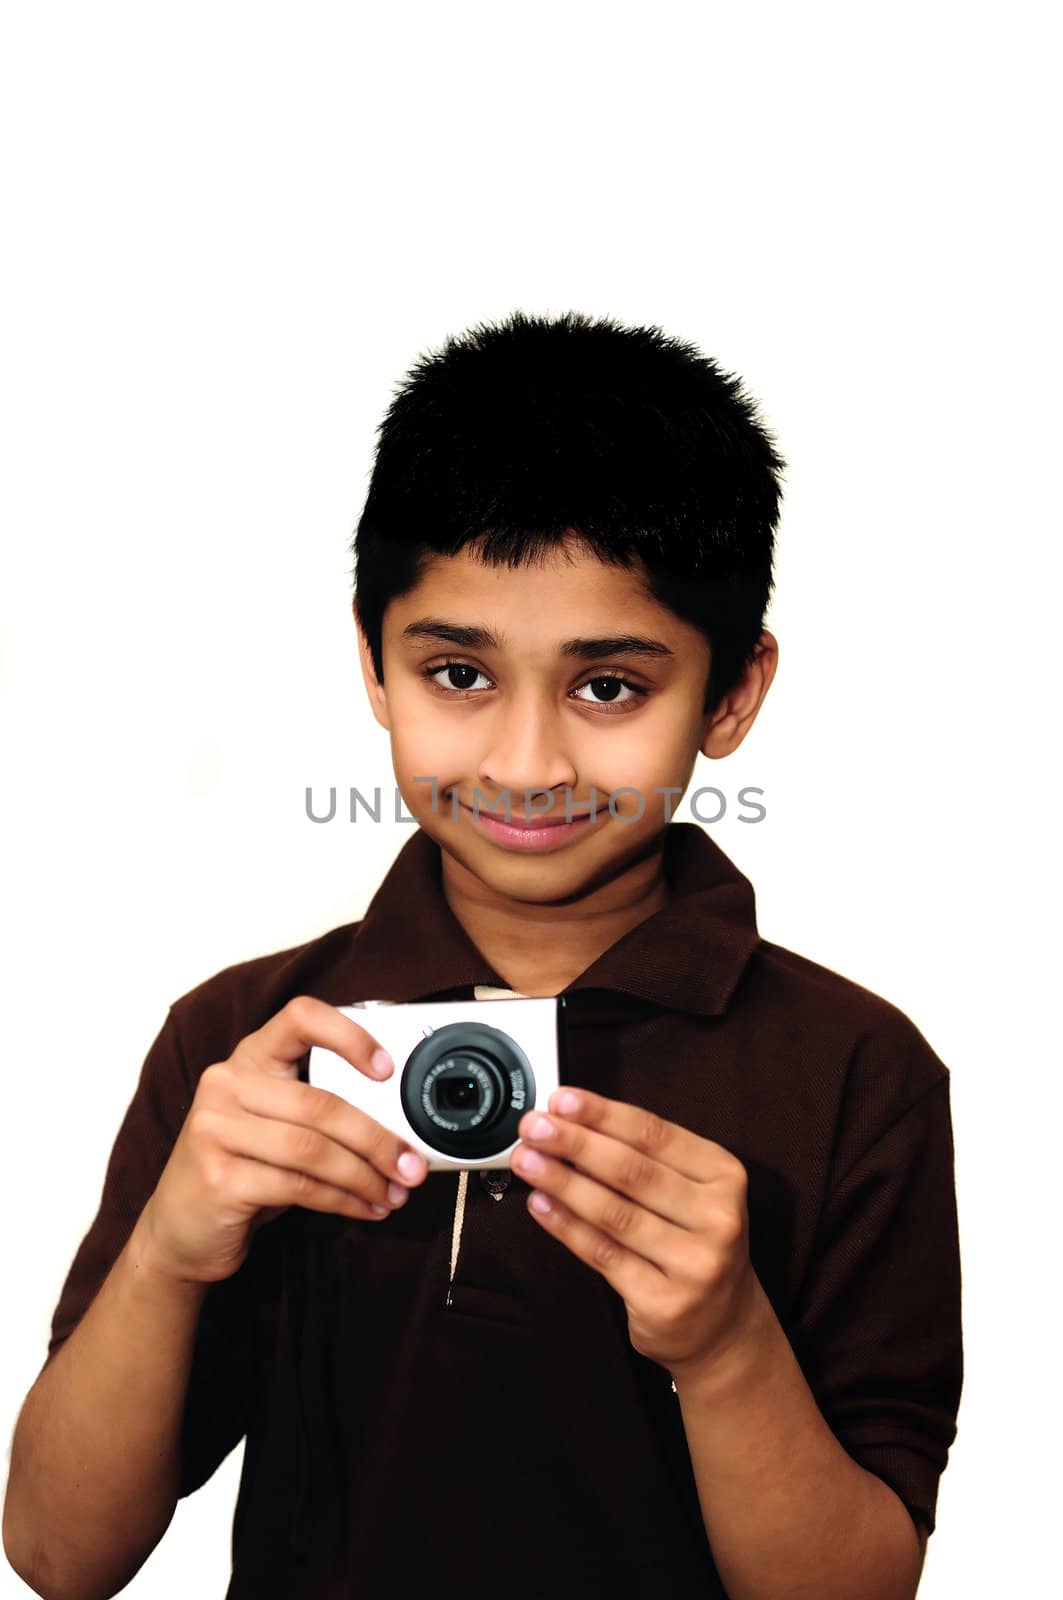 An handsome Indian kid taking photoa with a digital camera